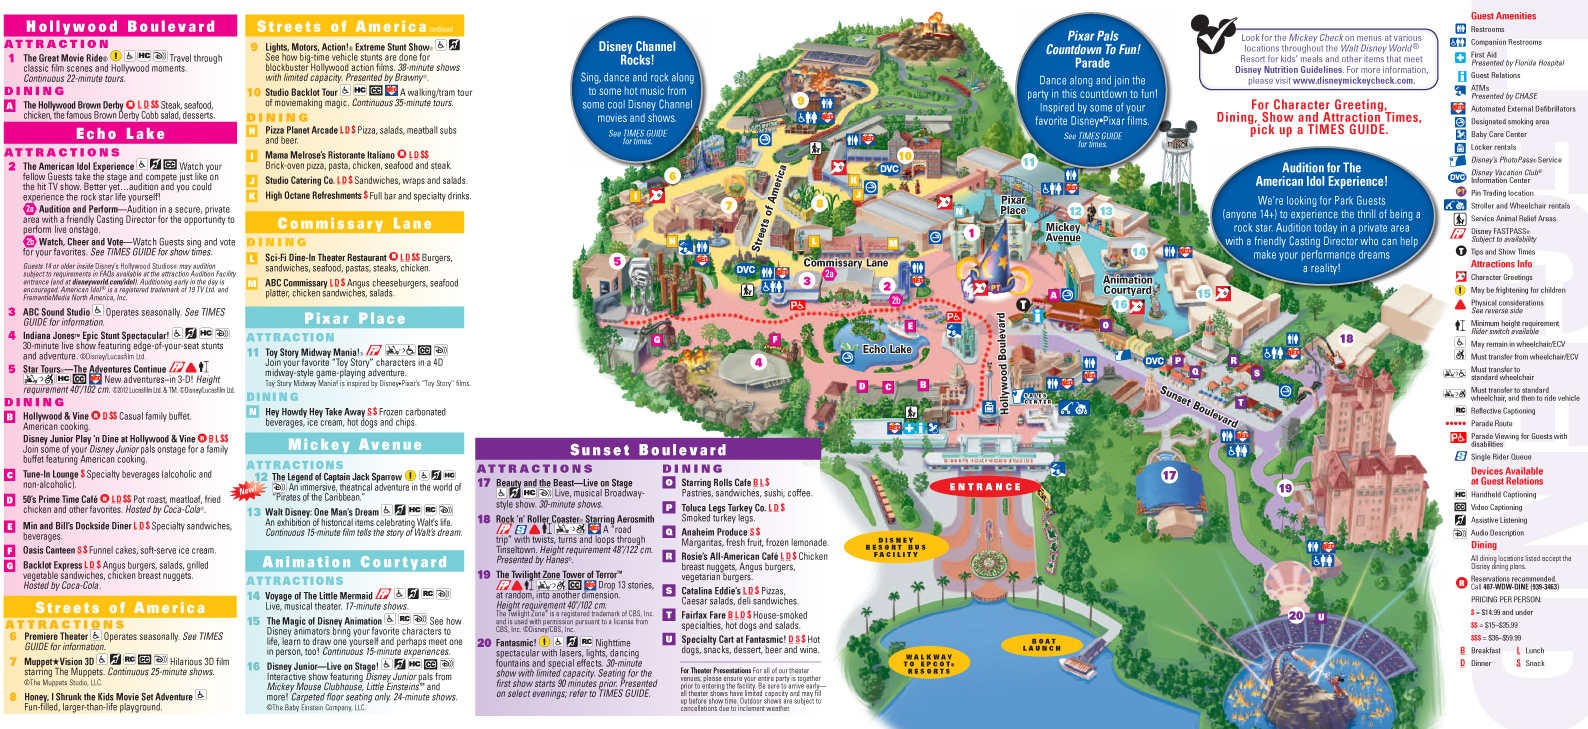 New park maps released today include 'My Disney Experience' details and